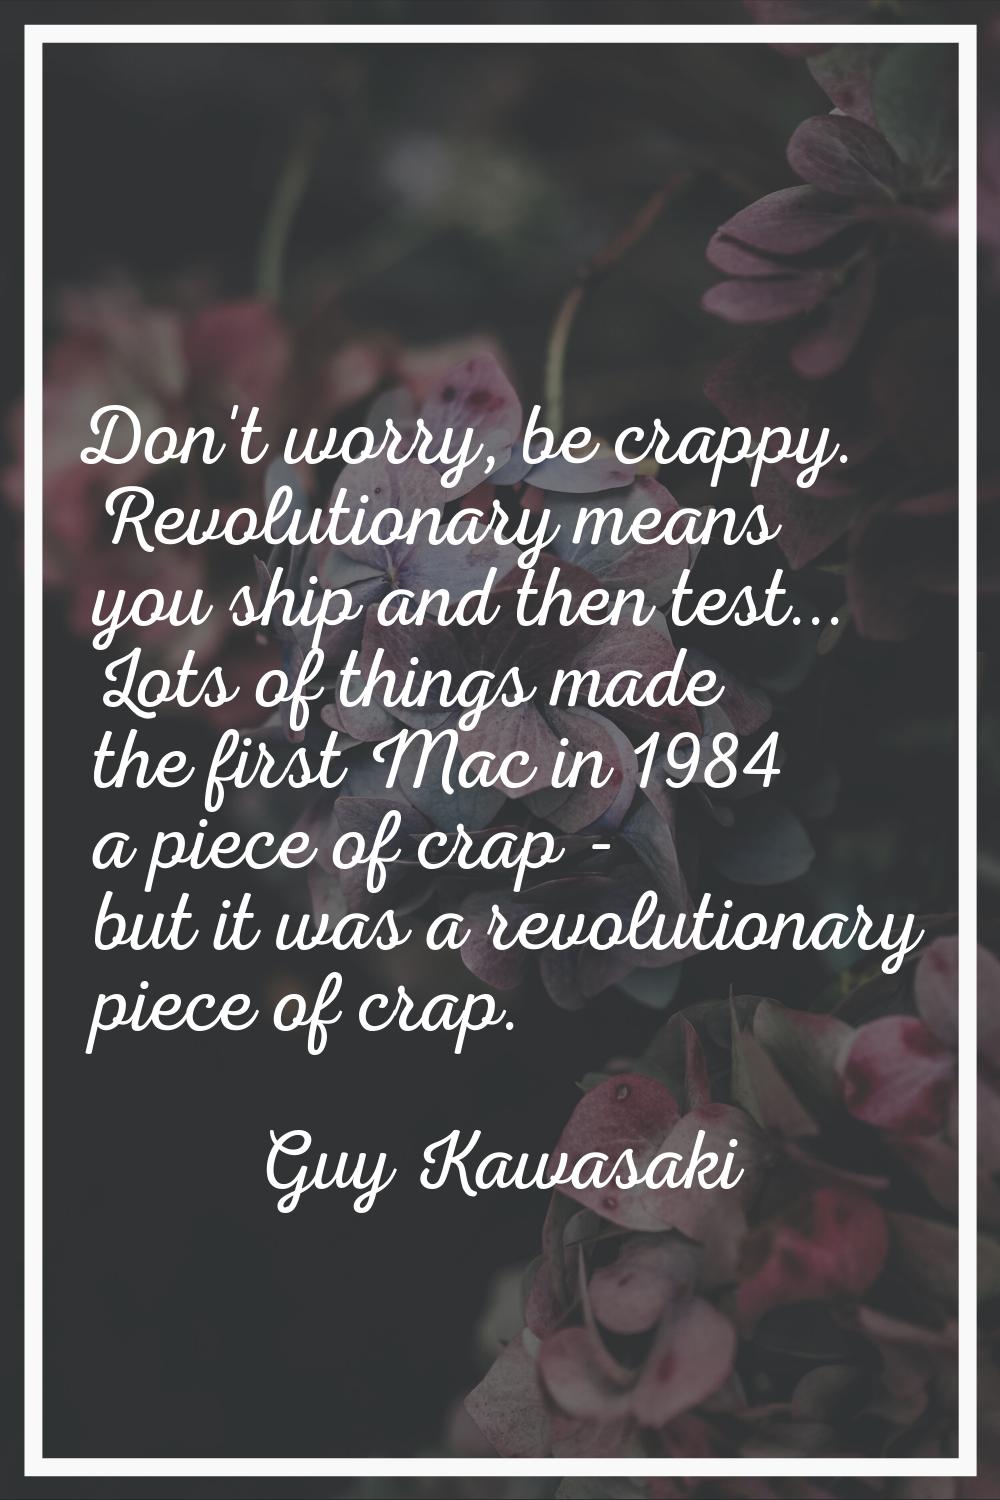 Don't worry, be crappy. Revolutionary means you ship and then test... Lots of things made the first